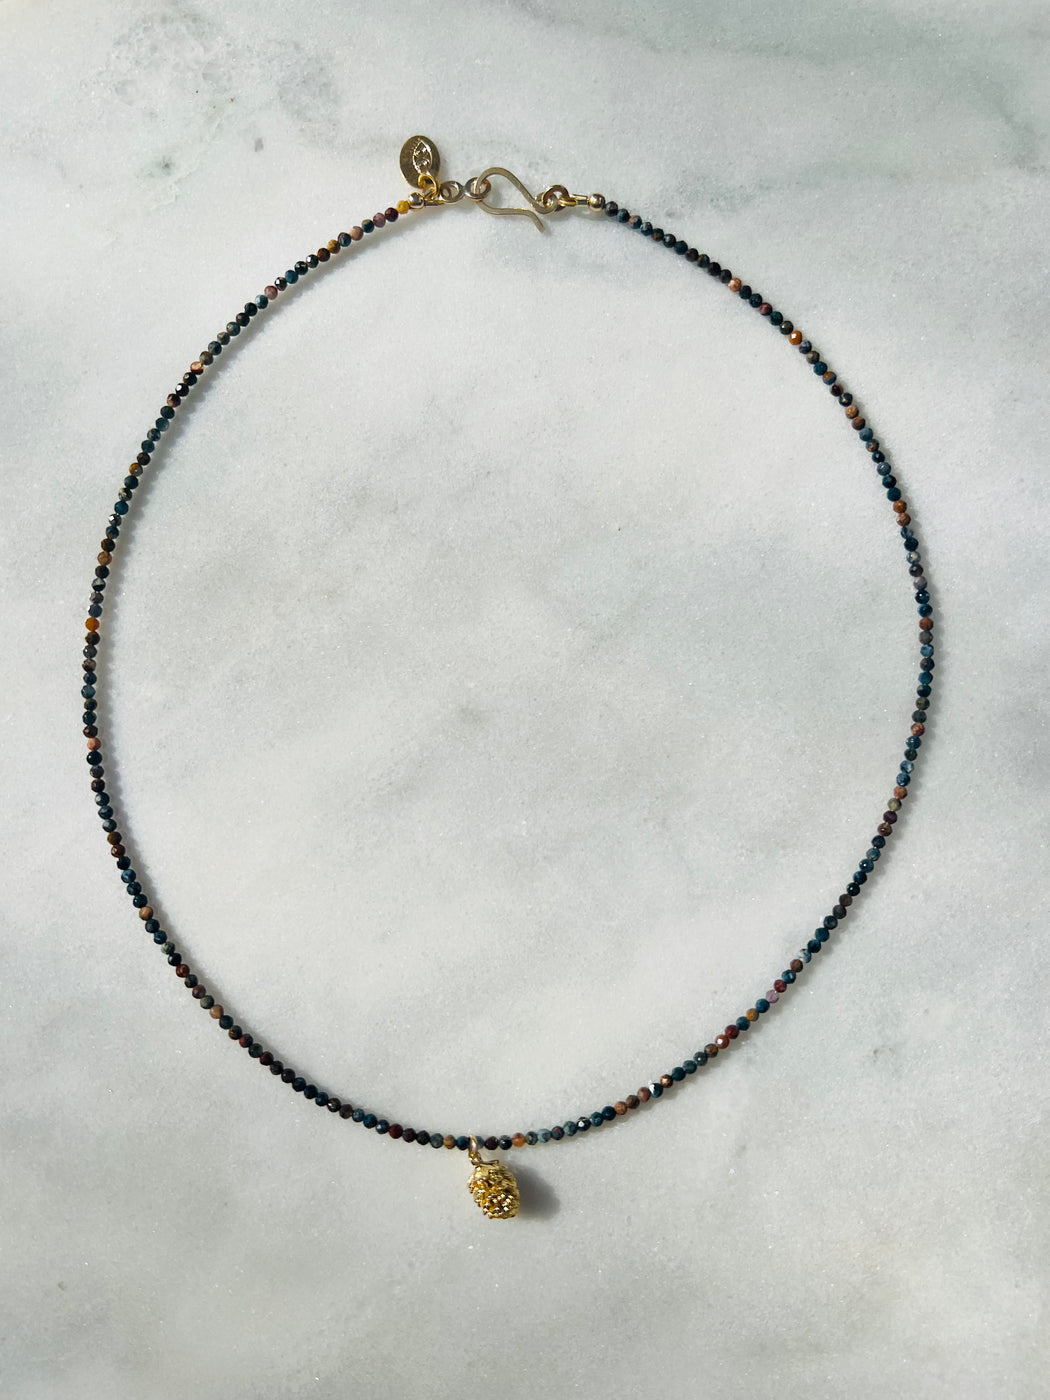 Nature's genius is already within you. Receive her downloads for your creative prowess with a hand from inspiring and vitality-boosting pietersite and enlightening pine. -- Pietersite strung on coated gold wire, Gold Vermeil clasp, pinecone charm.Available at PUNK WASP.